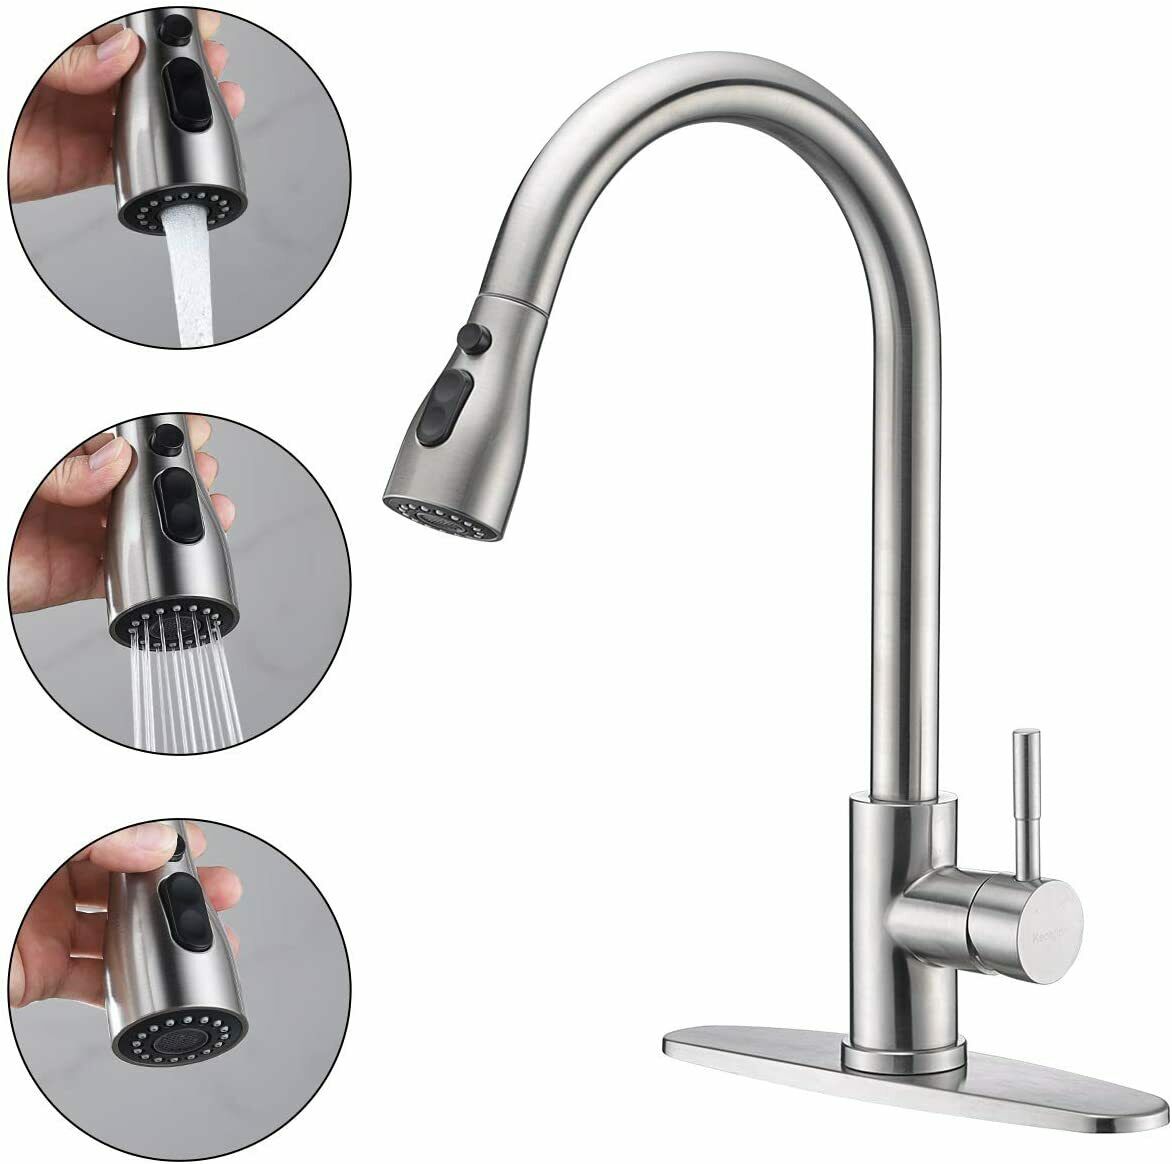 Kitchen Faucet Sink Pull Down Sprayer Swivel Spout Brushed Nickel With Cover